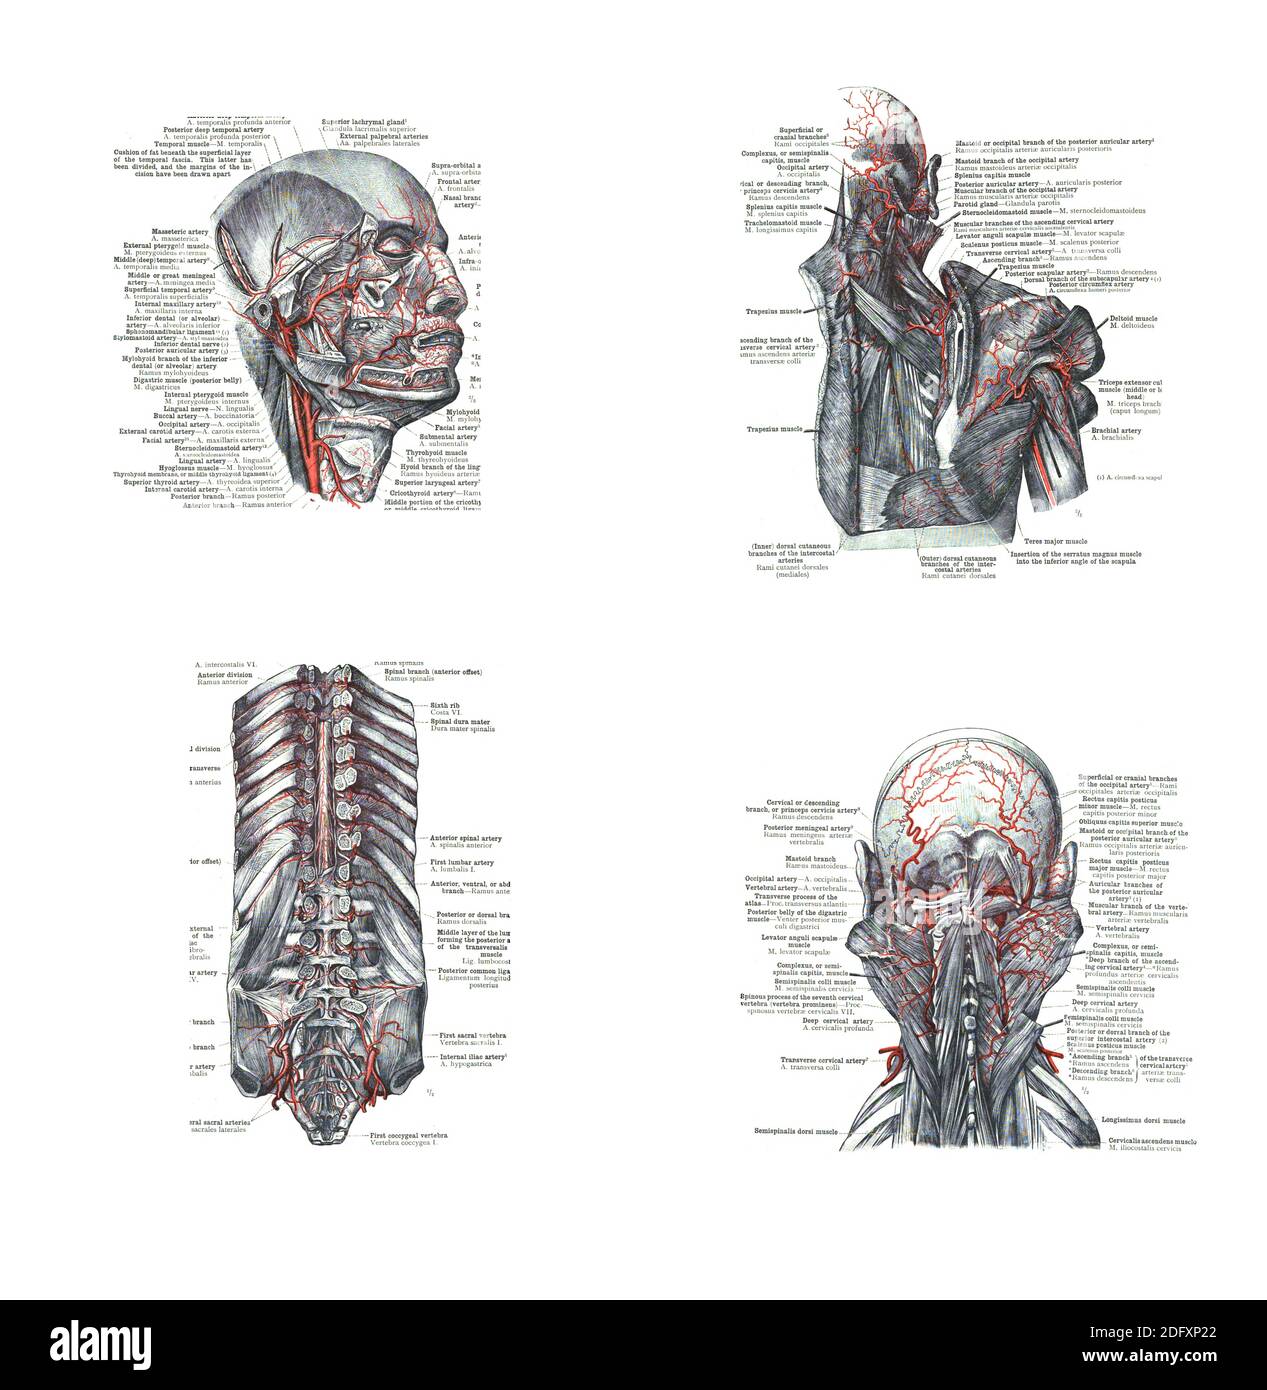 4 views of the head, back and spine,  from  An atlas of human anatomy:  Carl Toldt - 1904 Stock Photo